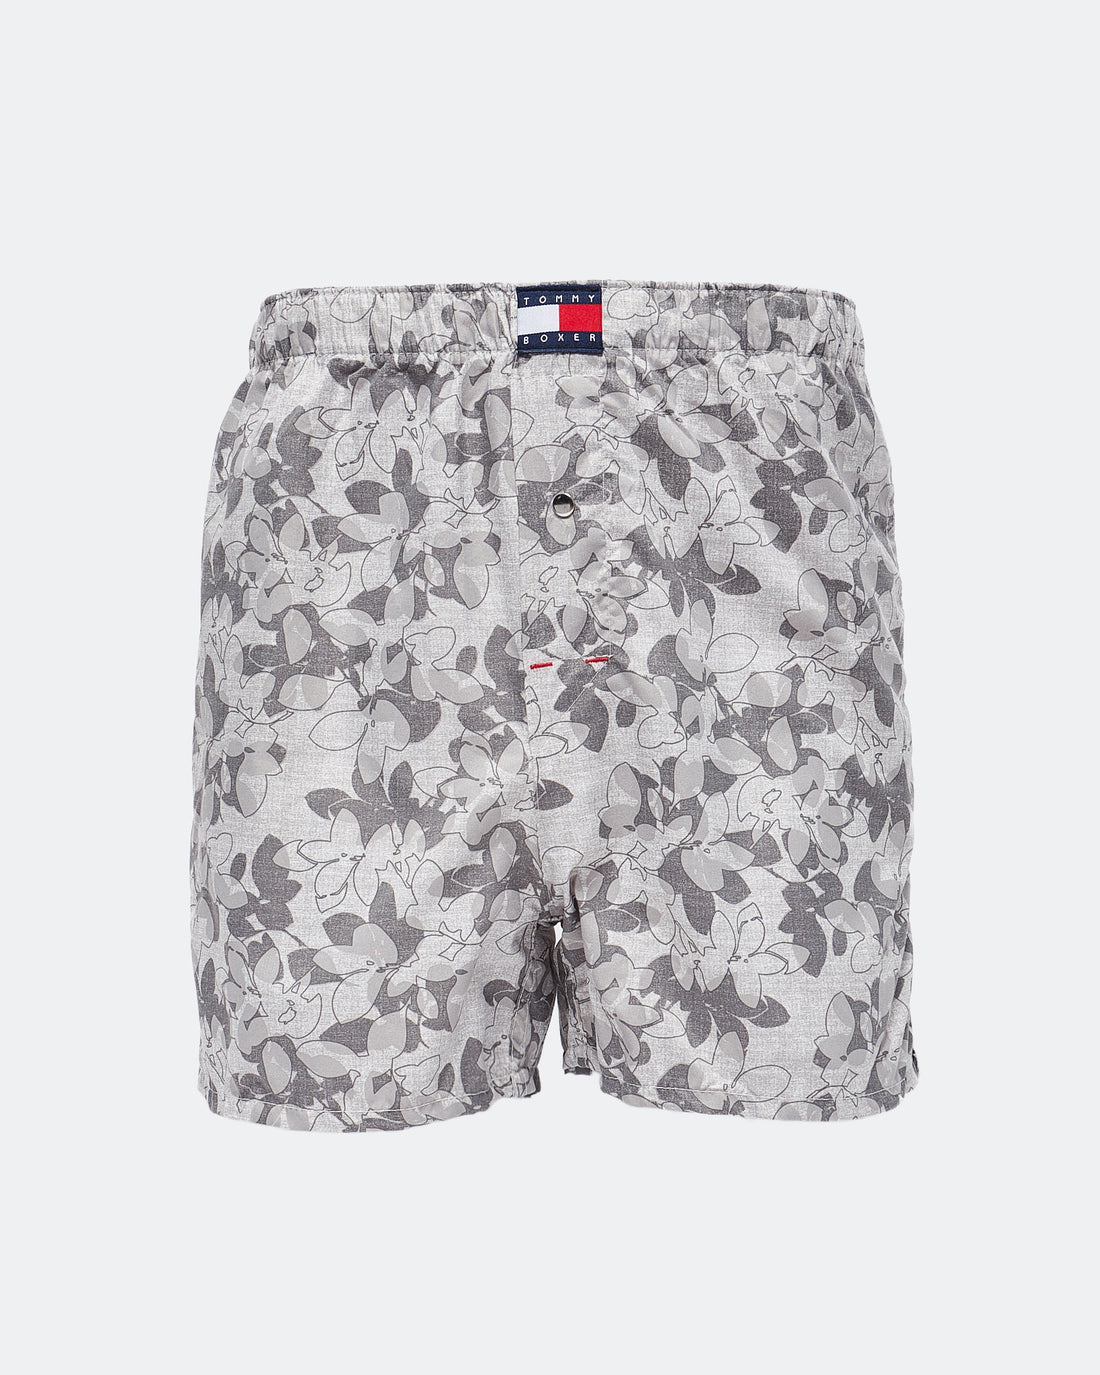 MOI OUTFIT-Floral Over Printed Men Boxer 5.90